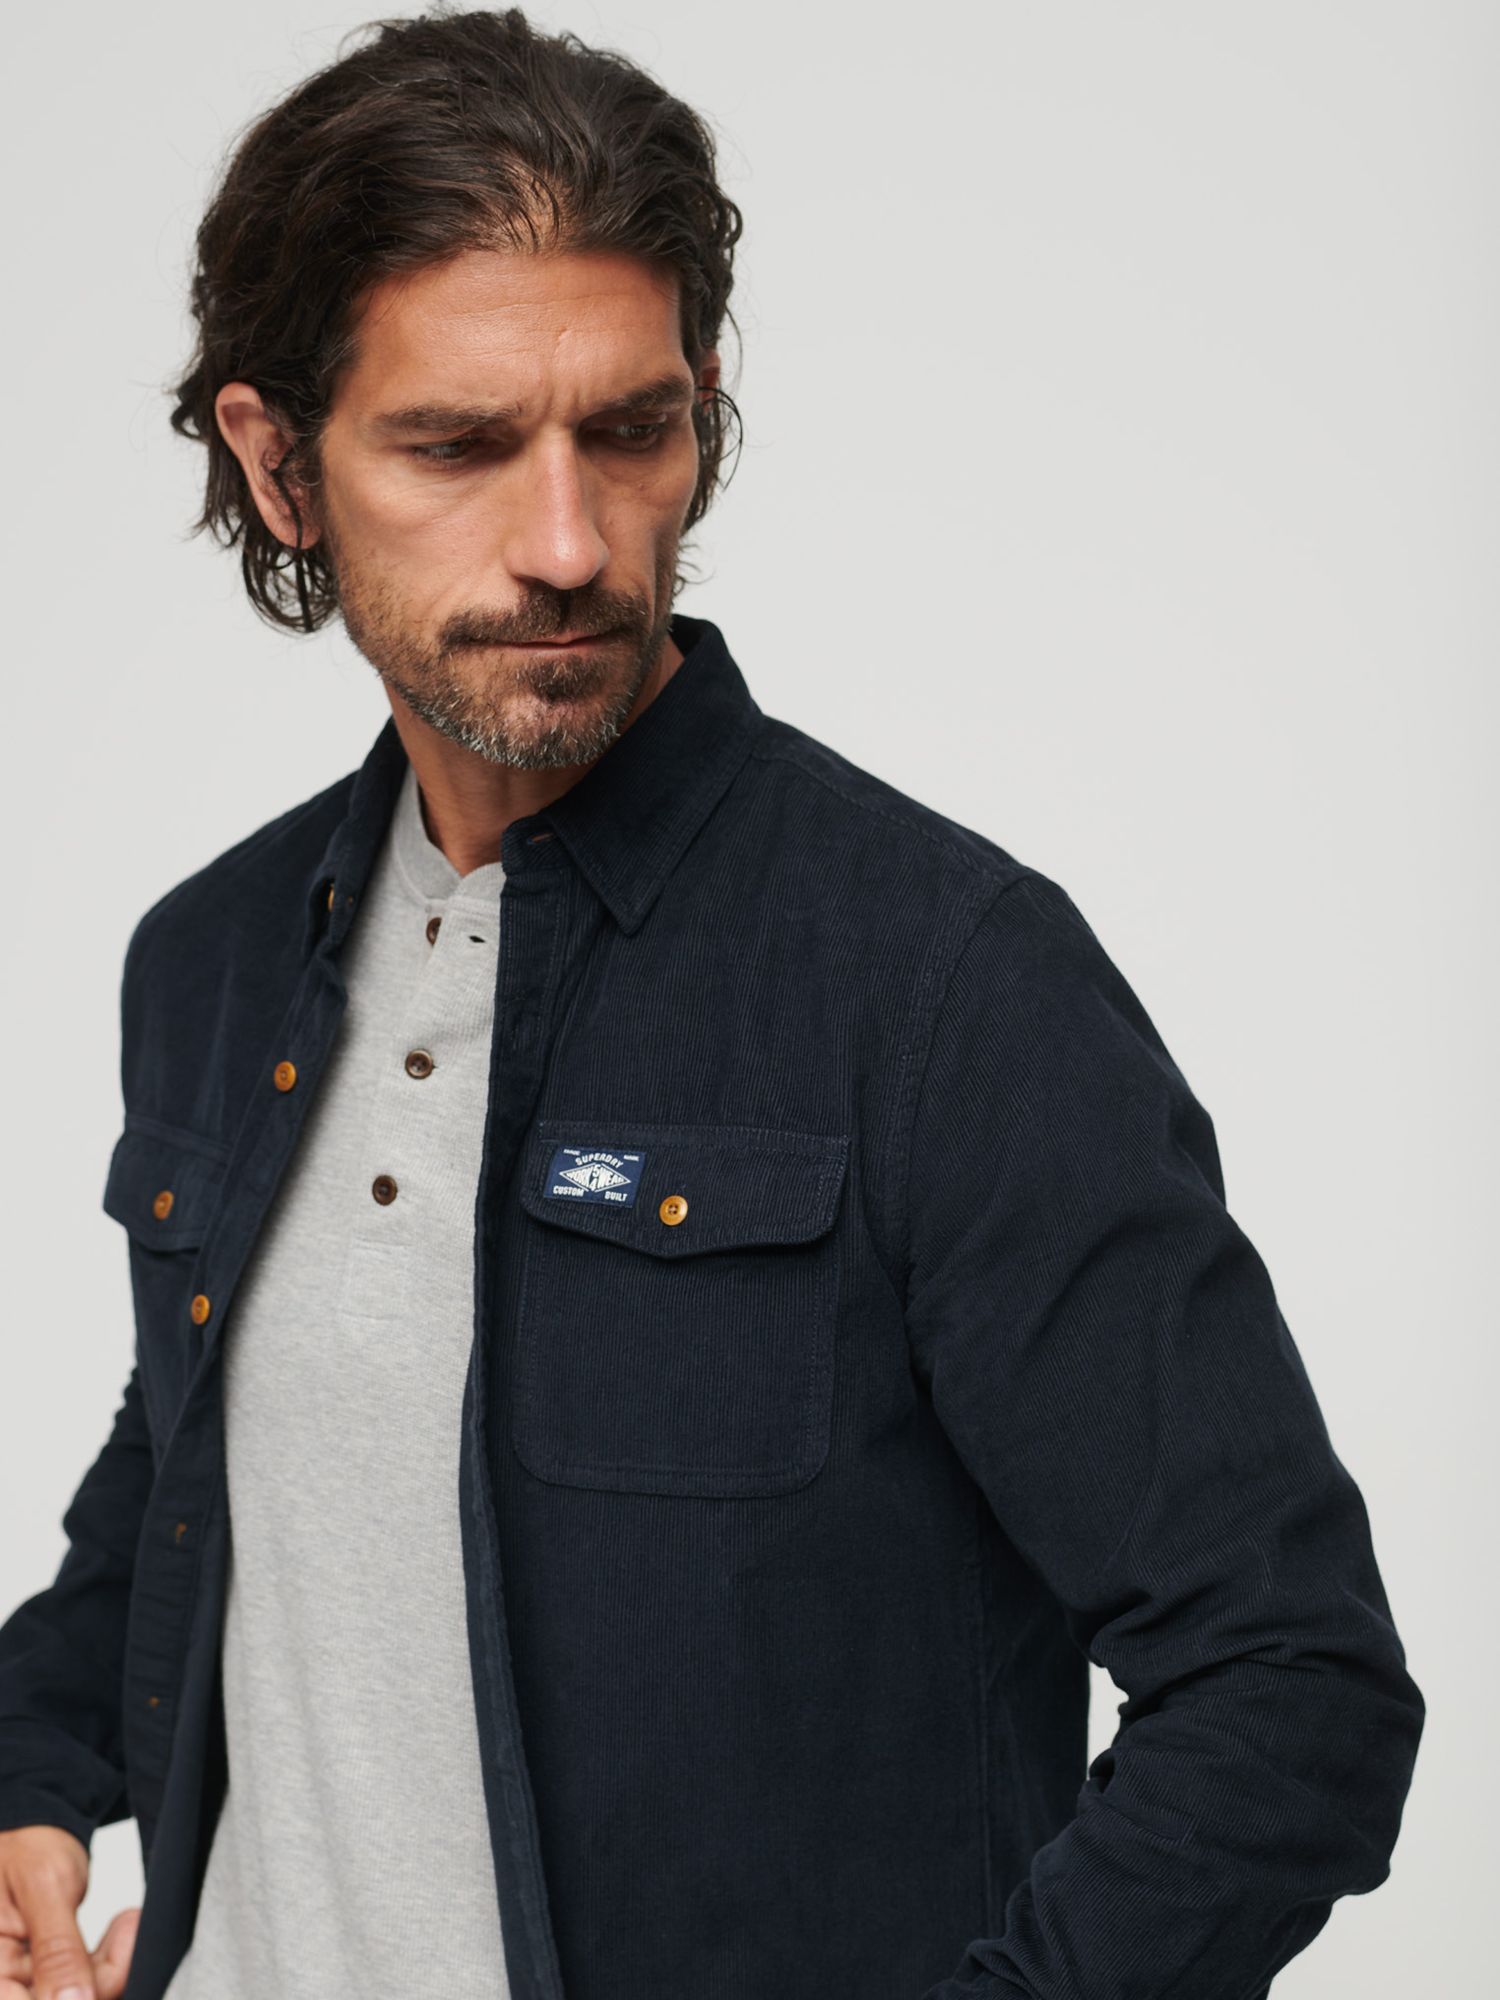 Buy Superdry Trailsman Relaxed Fit Corduroy Shirt Online at johnlewis.com